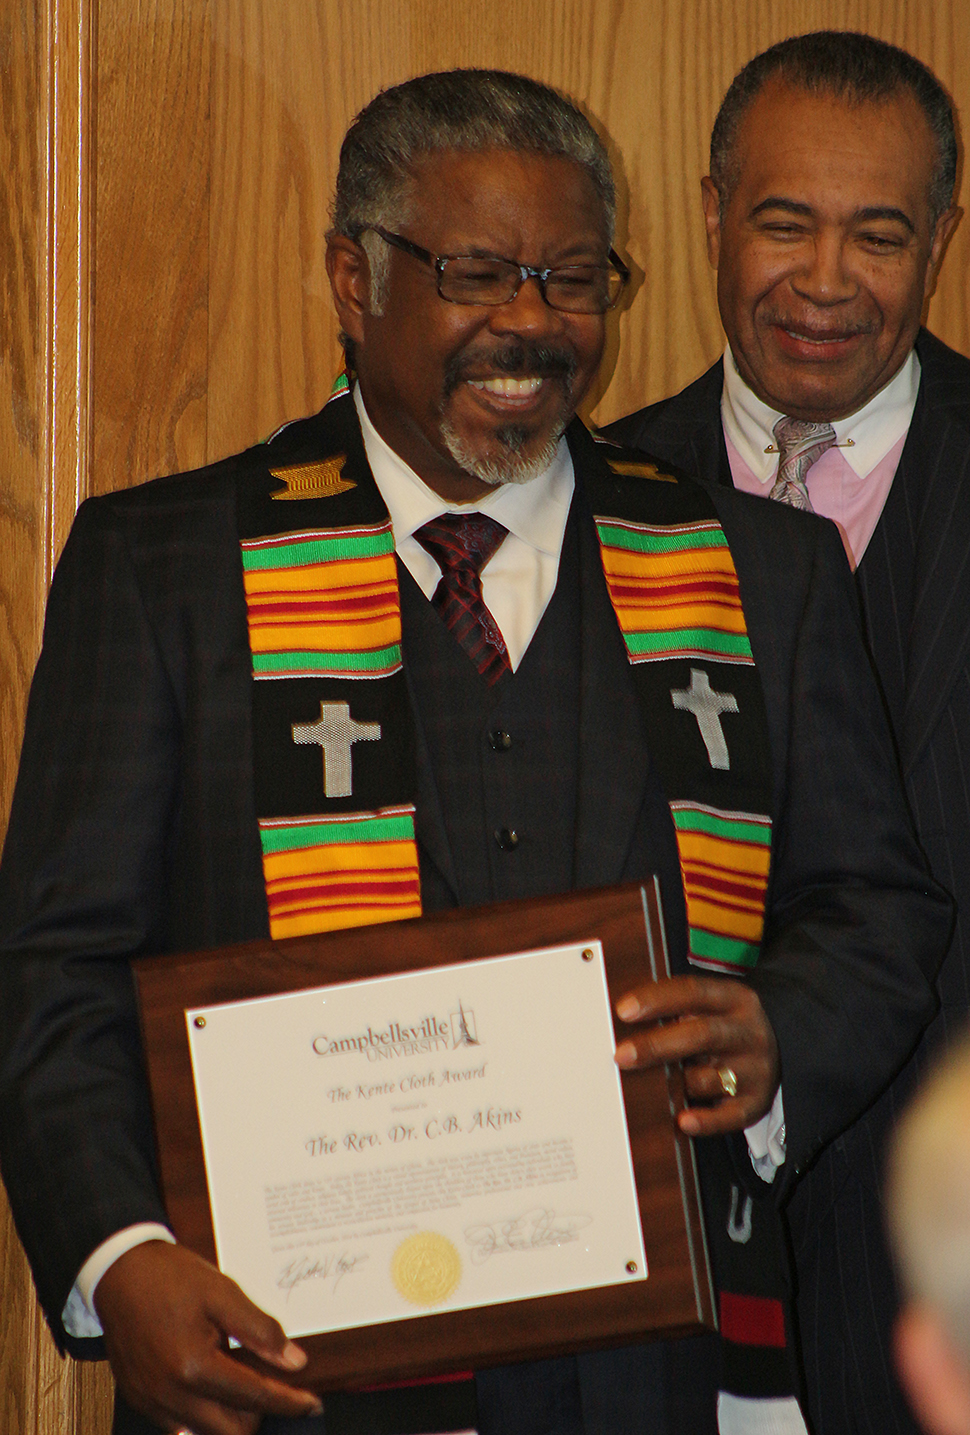 Dr. C.B. Akins, left, upon receiving the Kente  Cloth Award. To the right is Dr. Joseph Owens,  chair of CU’s Board of Trustees, who helped present  the award. (Campbellsville University Photo by  Drew Tucker)